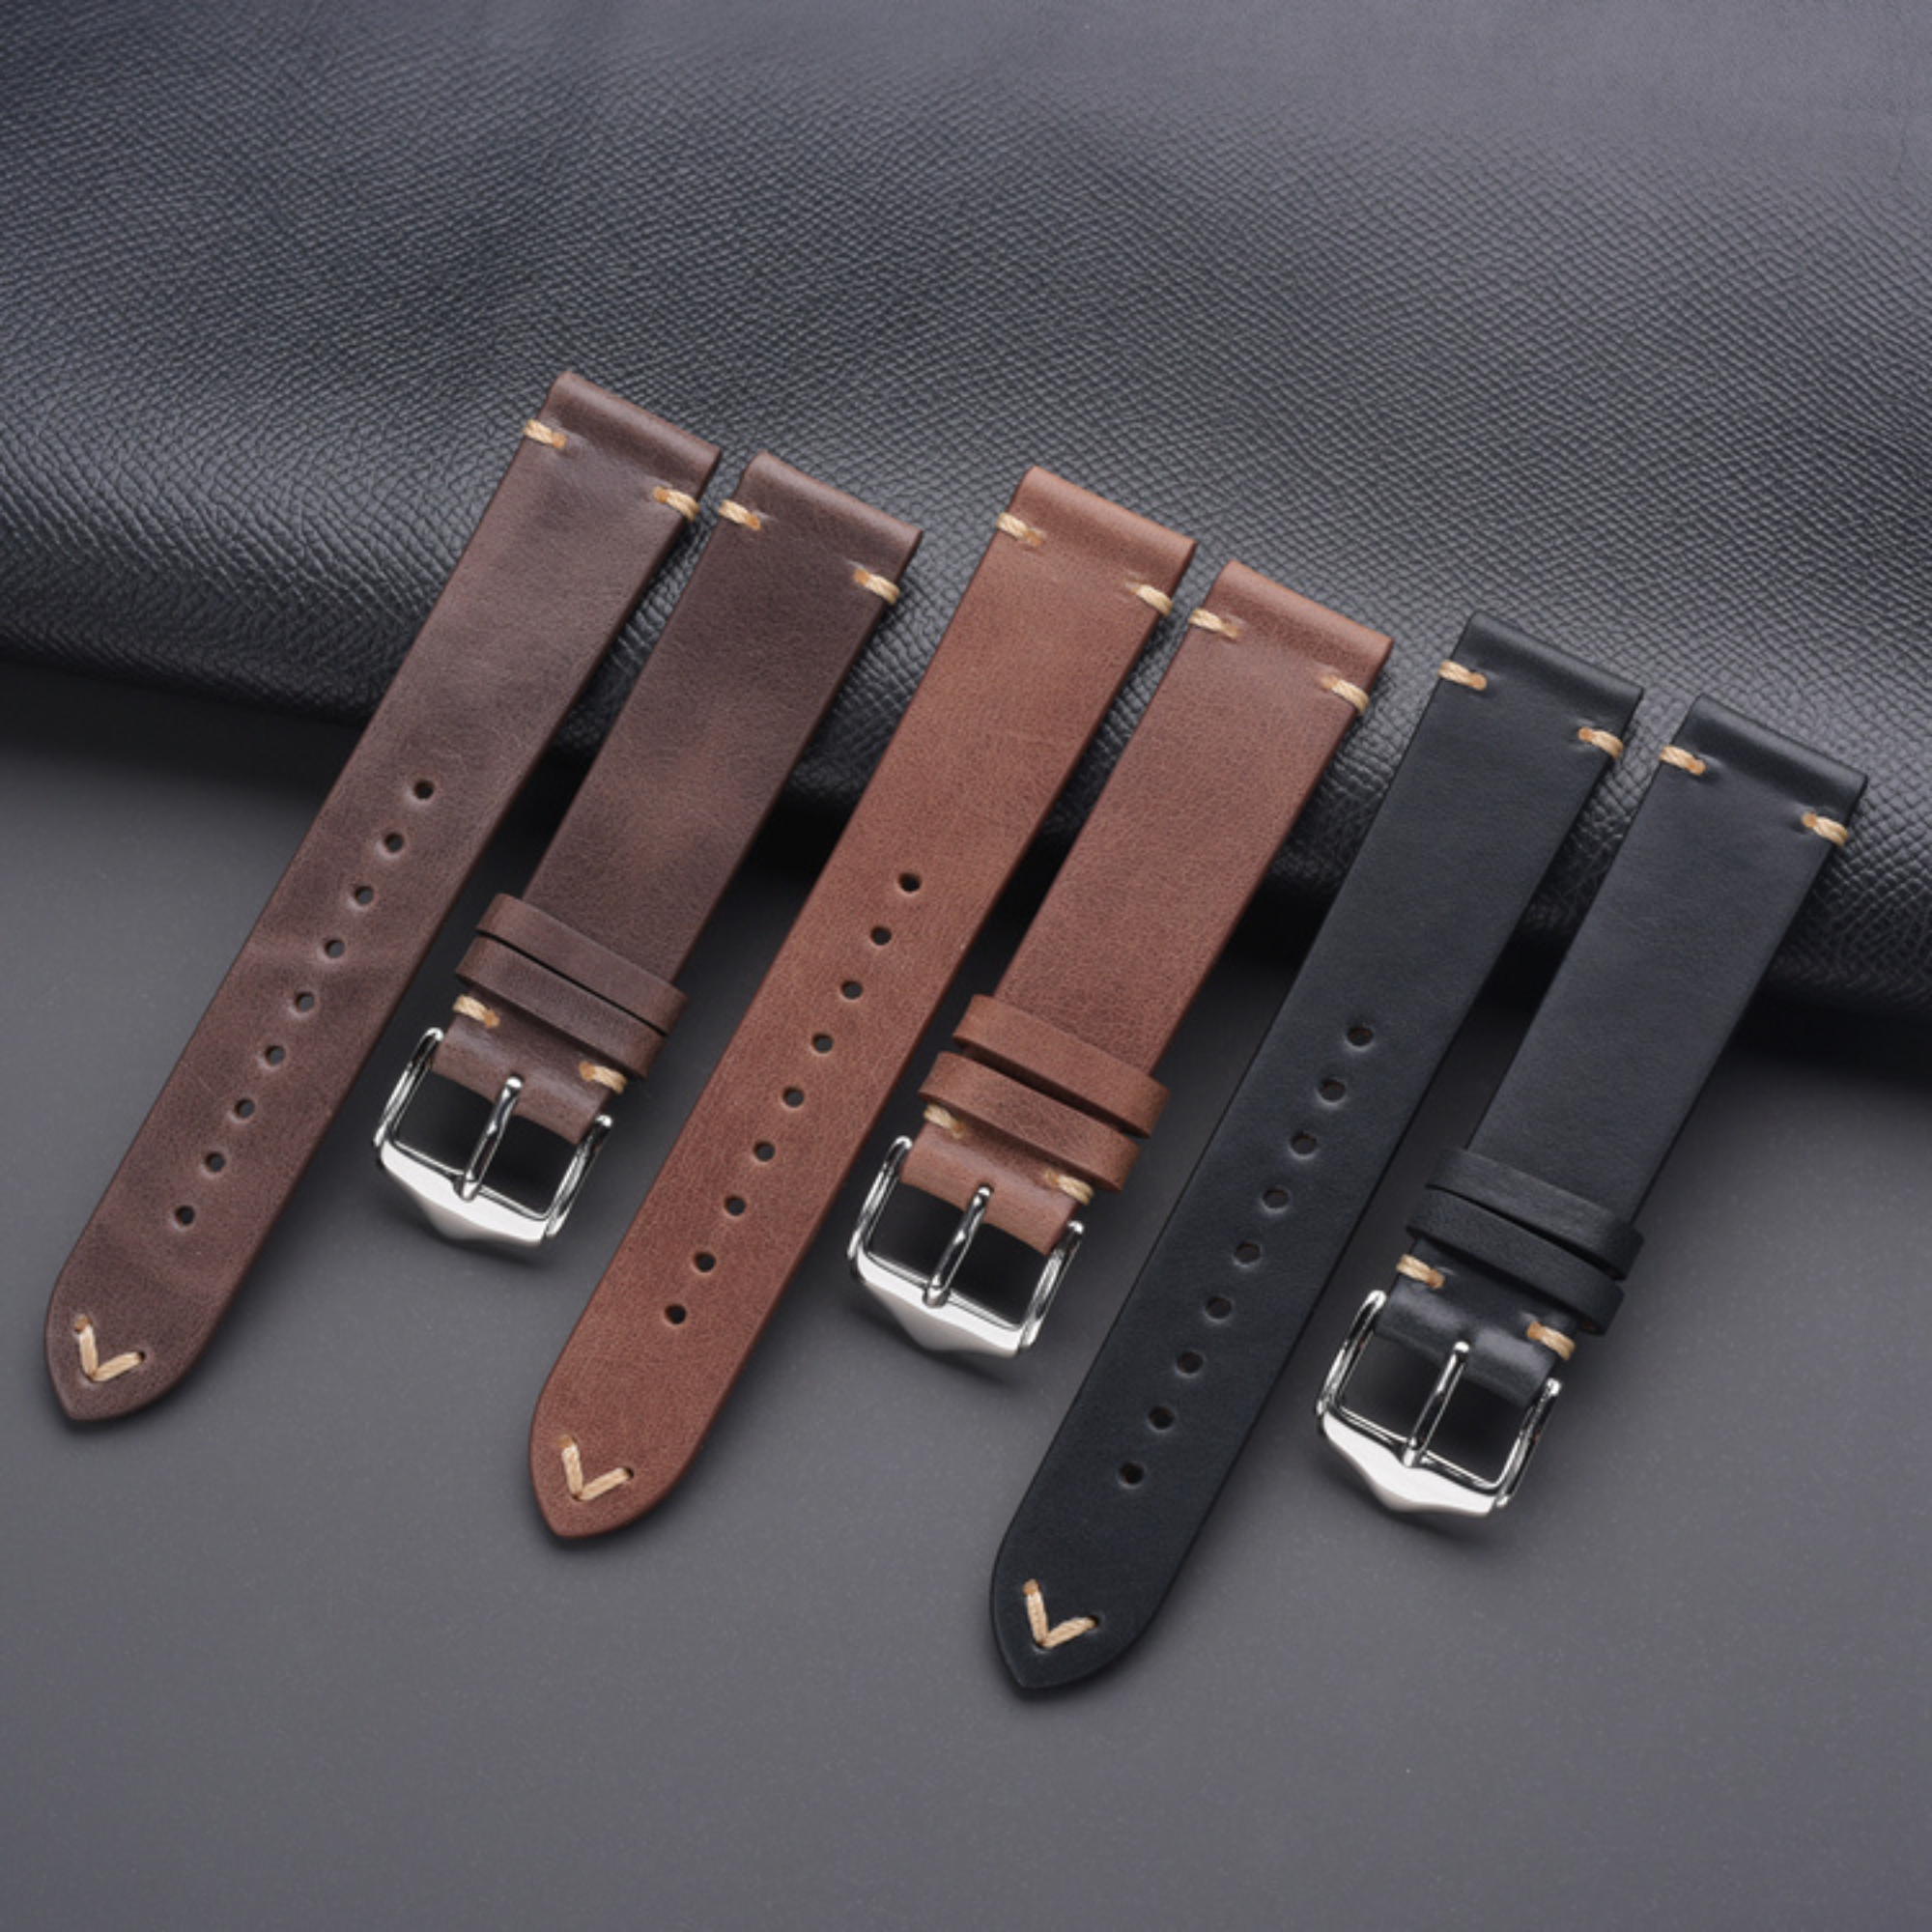 Genuine Leather Watch Strap Watchband Accessories 20mm - Black watch leather strap band india online dream watches